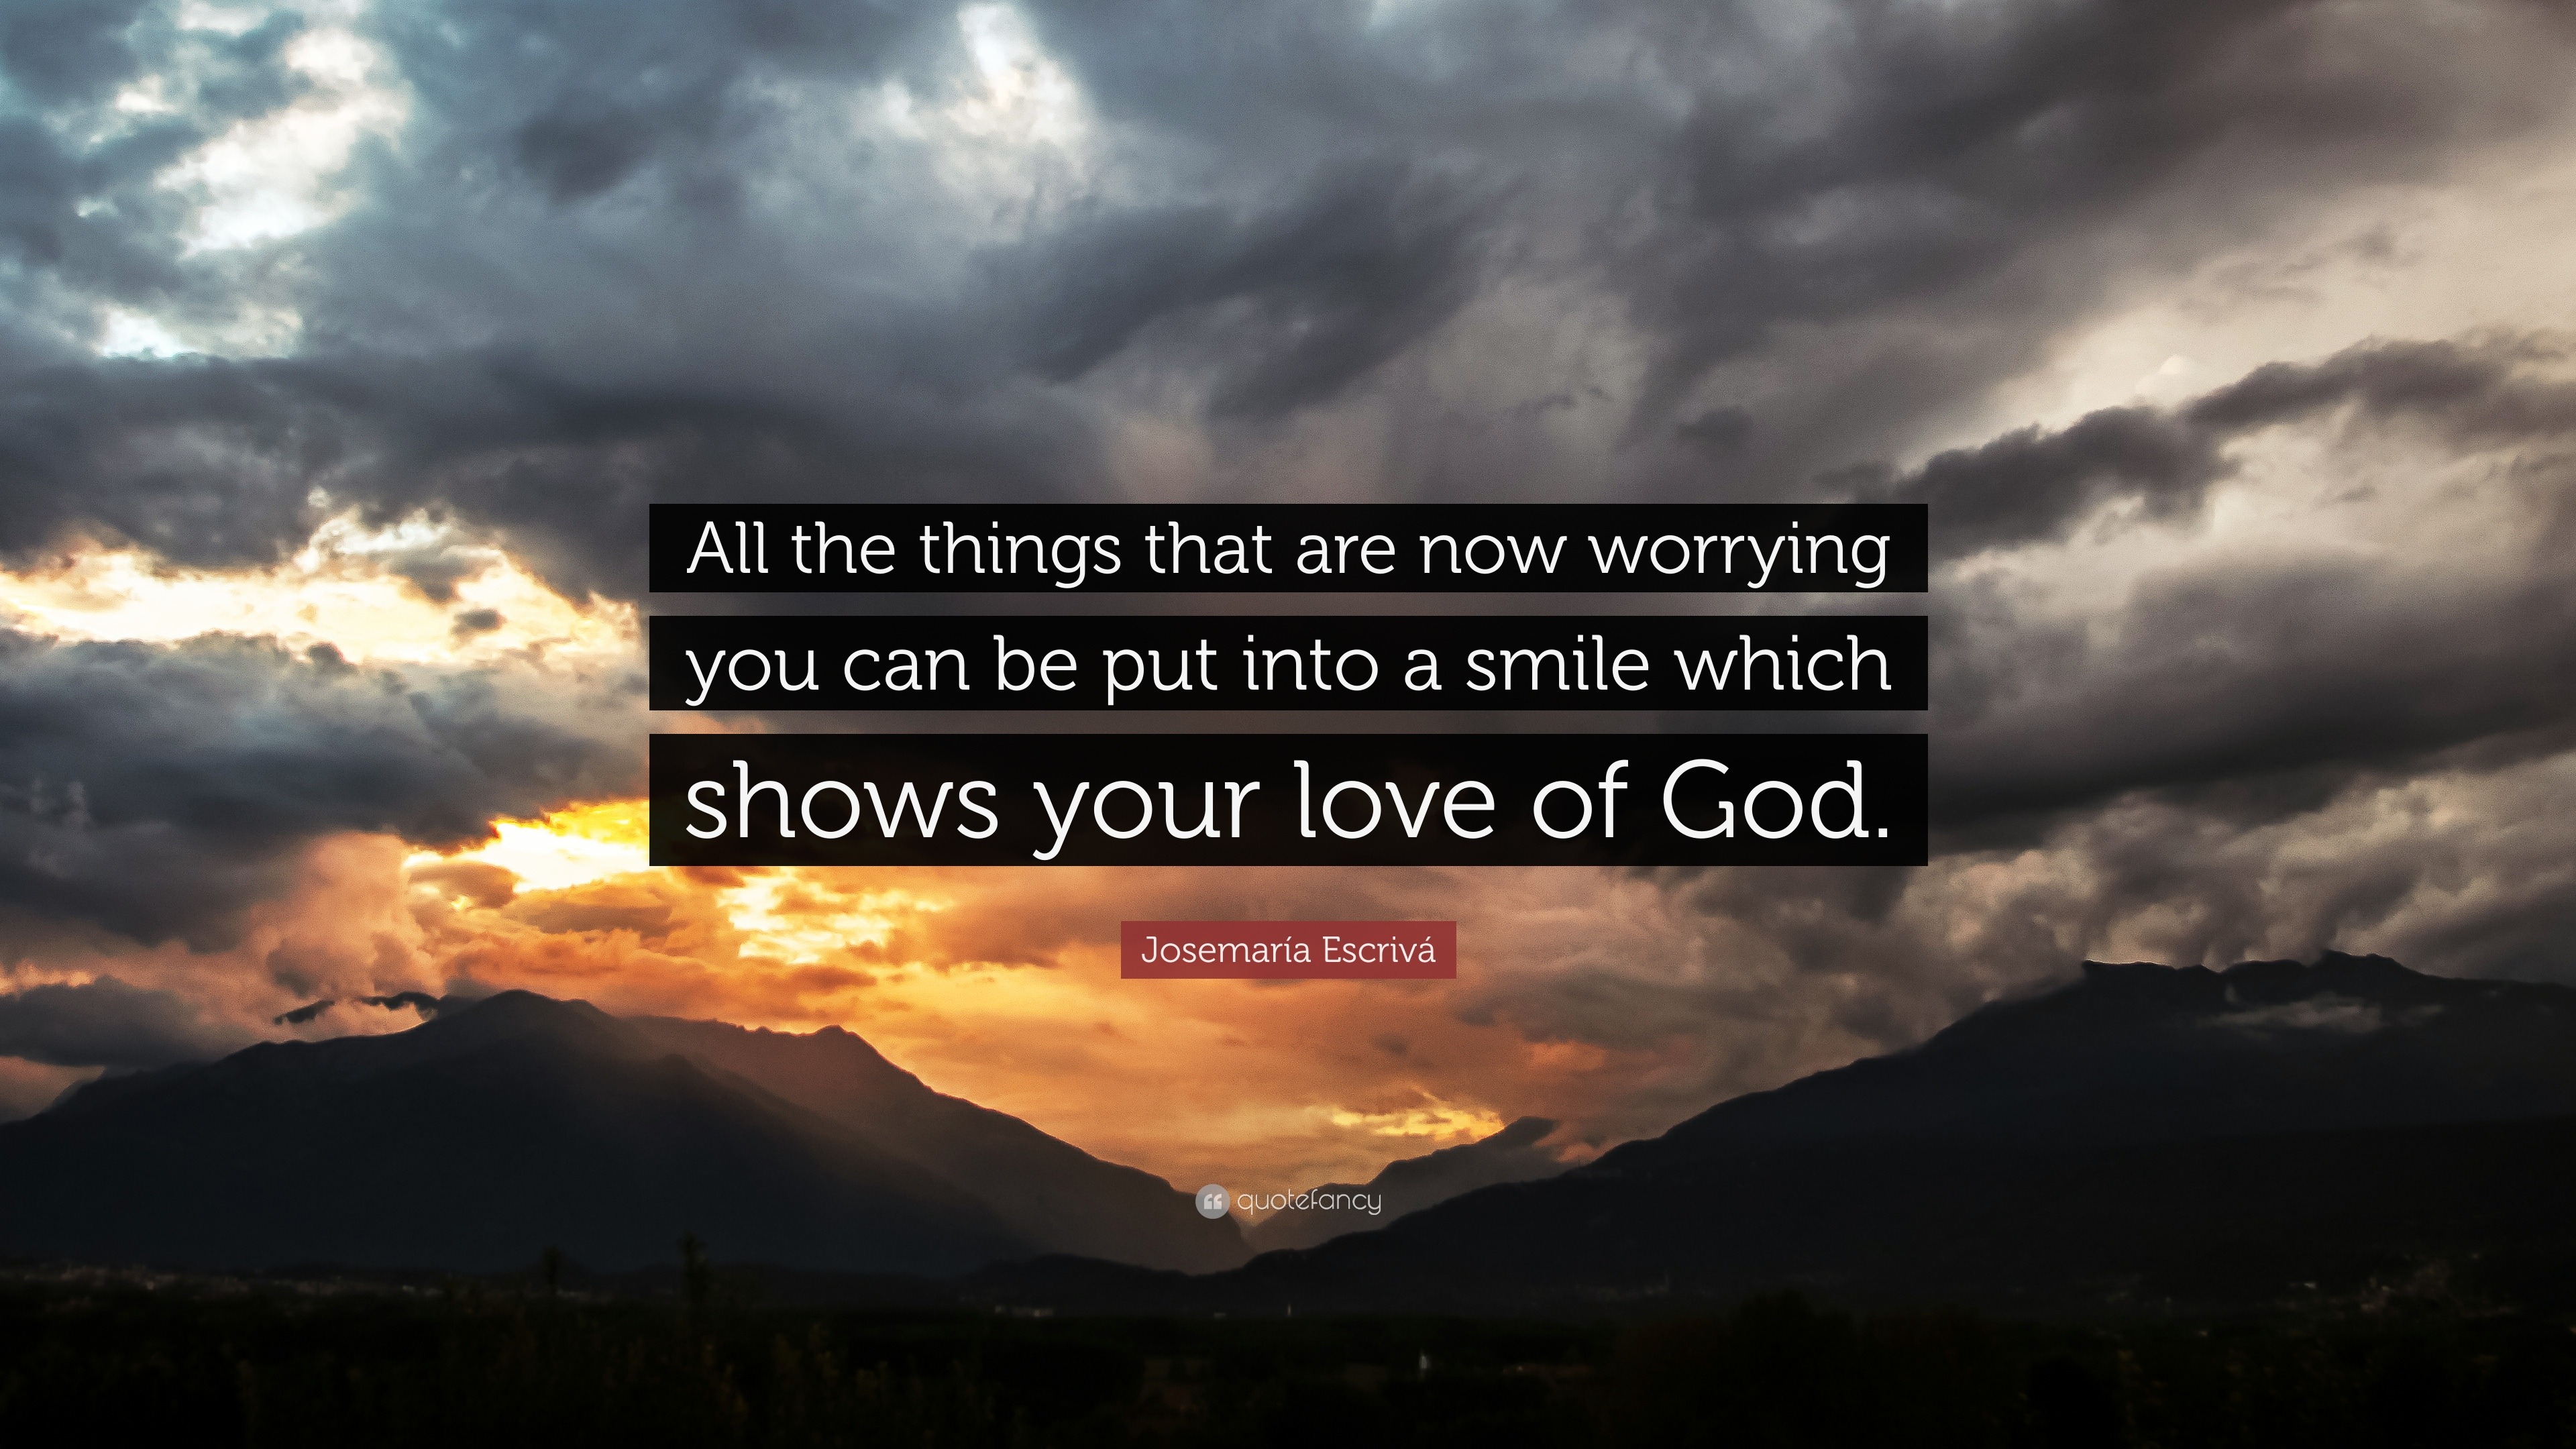 Josemar­a Escrivá Quote “All the things that are now worrying you can be put